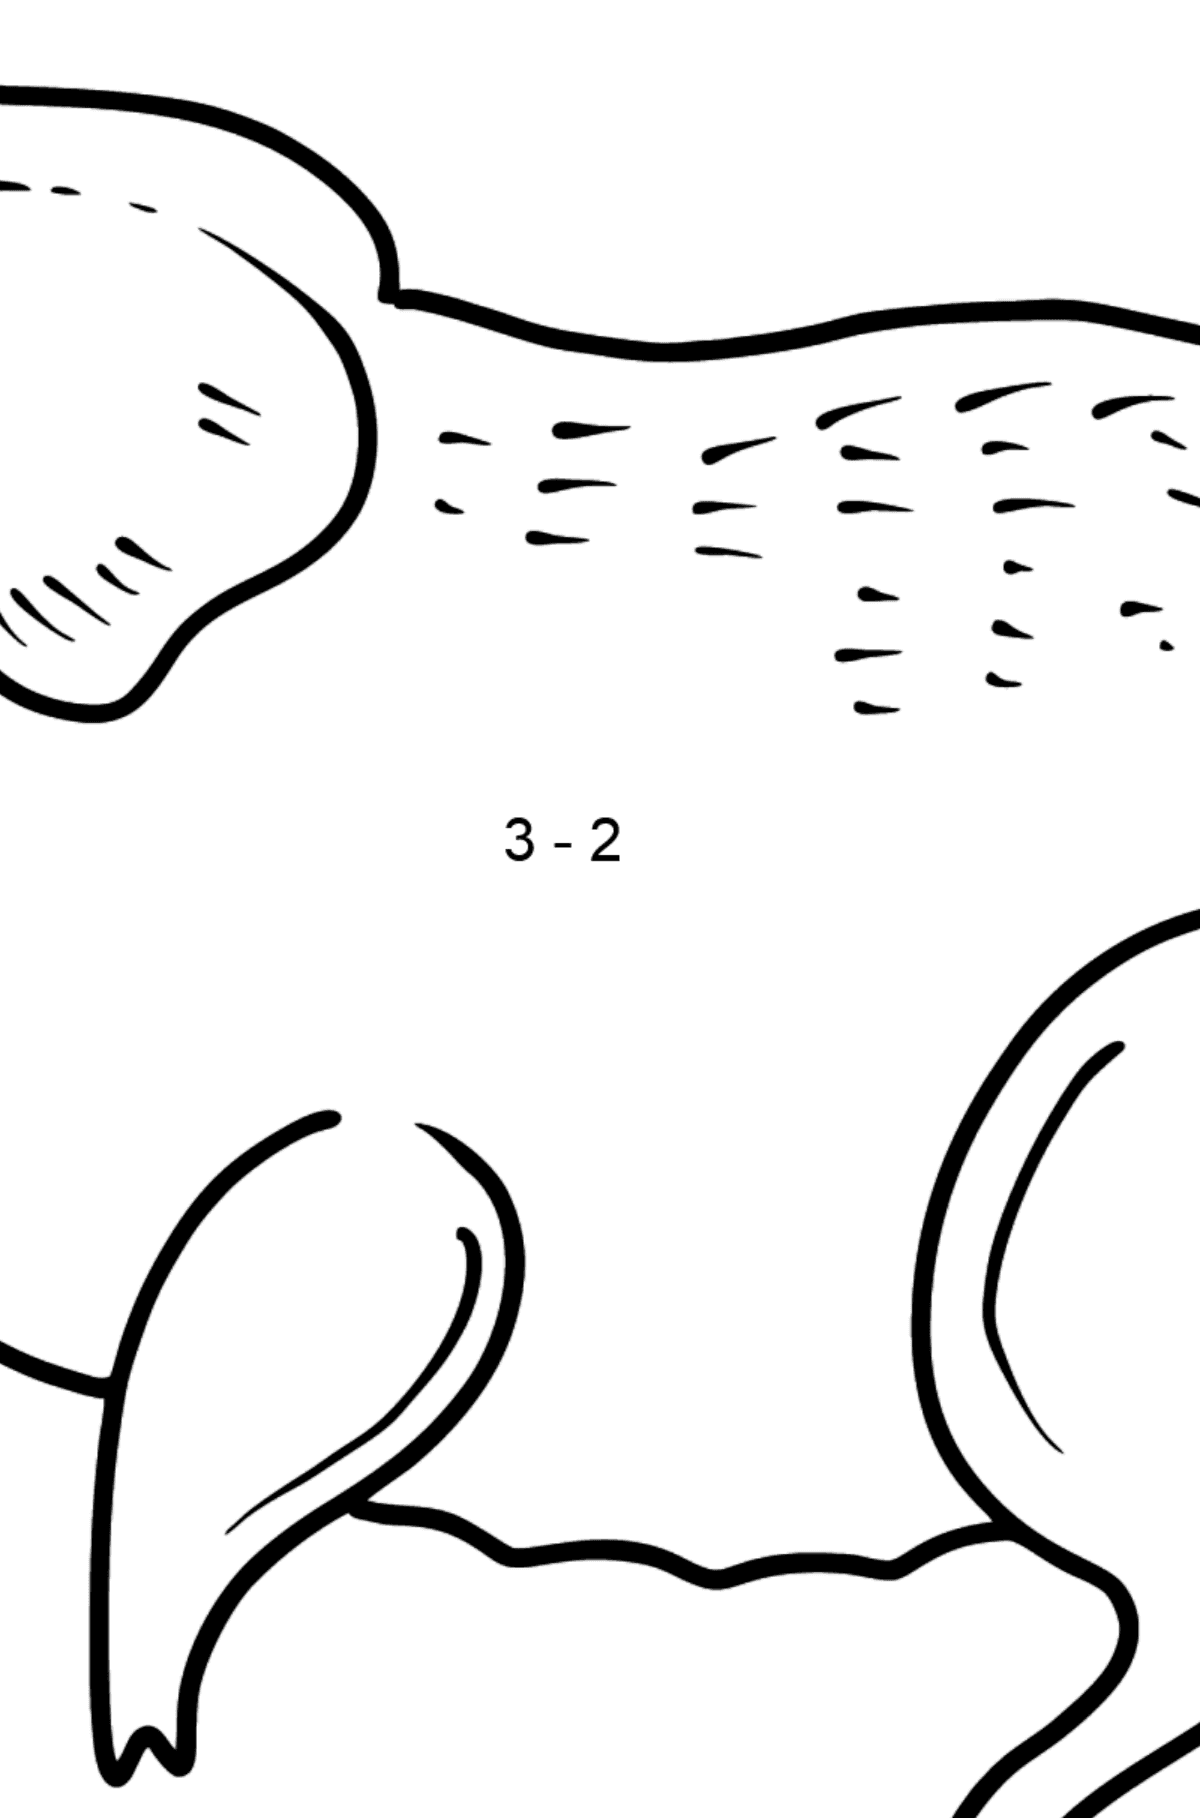 Pig coloring page - Math Coloring - Subtraction for Kids